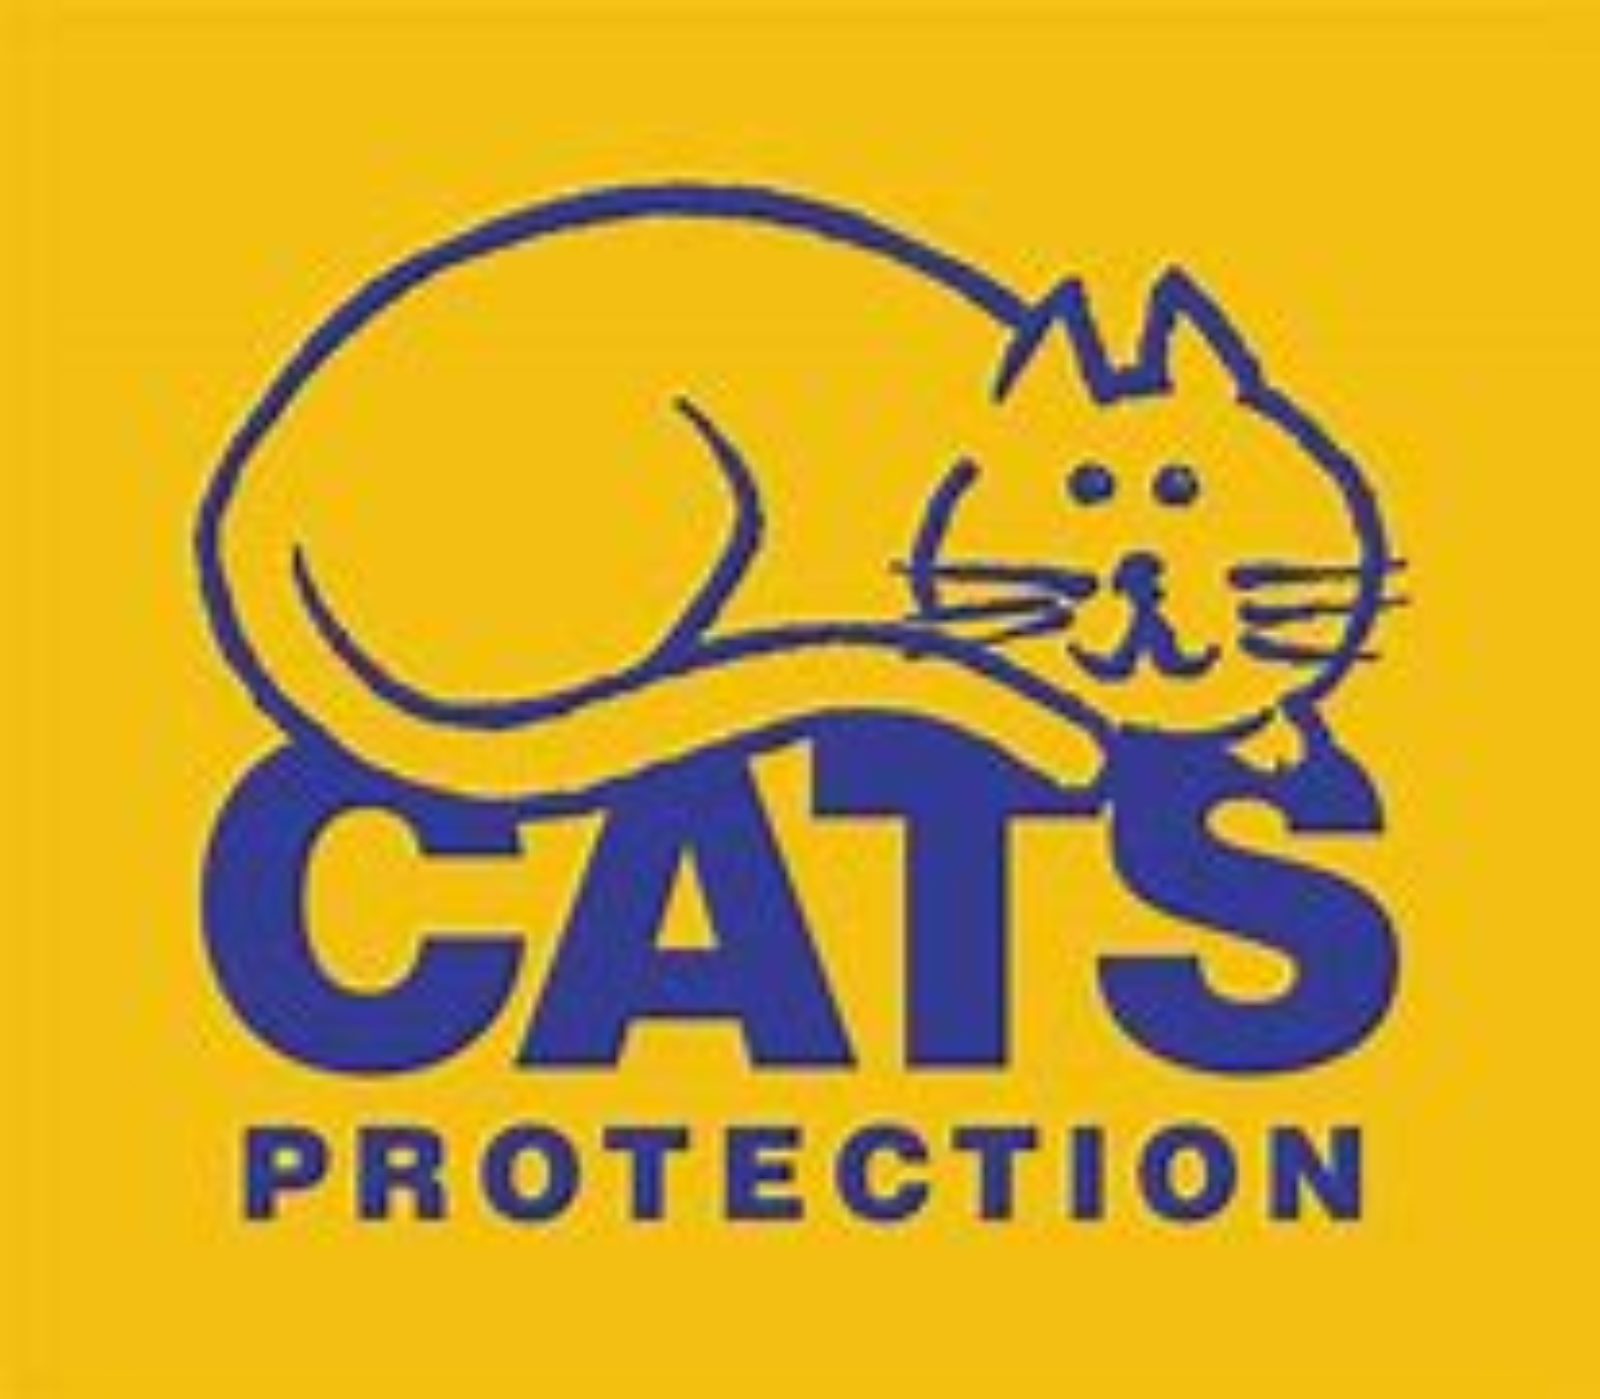 Cats Protection 